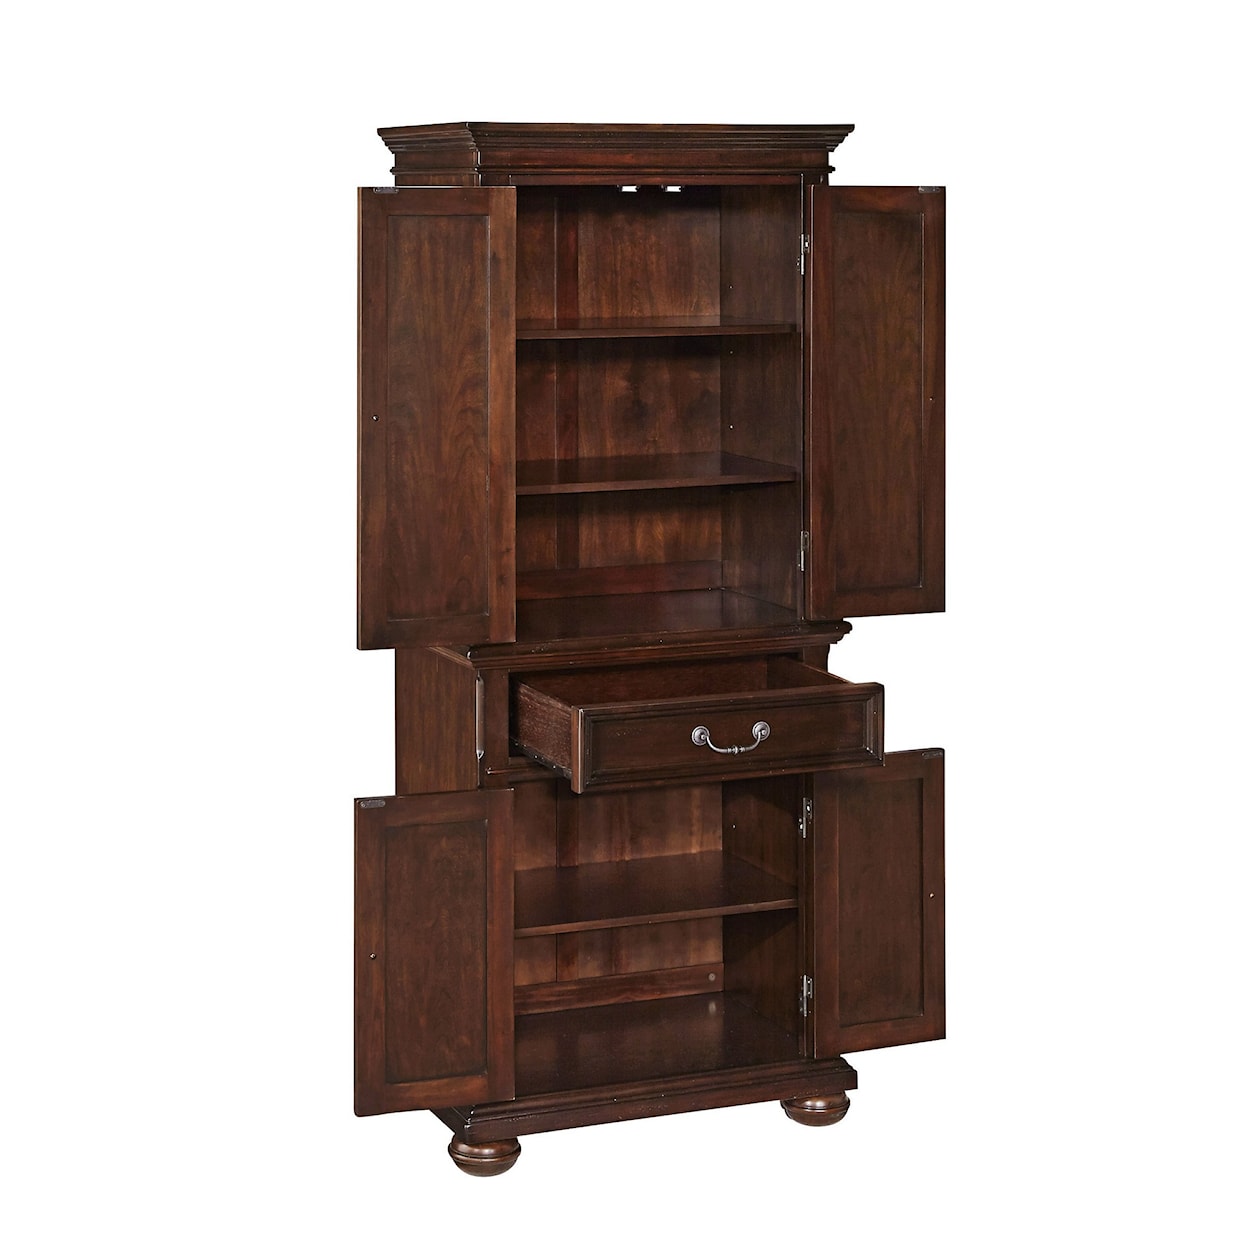 homestyles Colonia Classics Pantry Cupboard